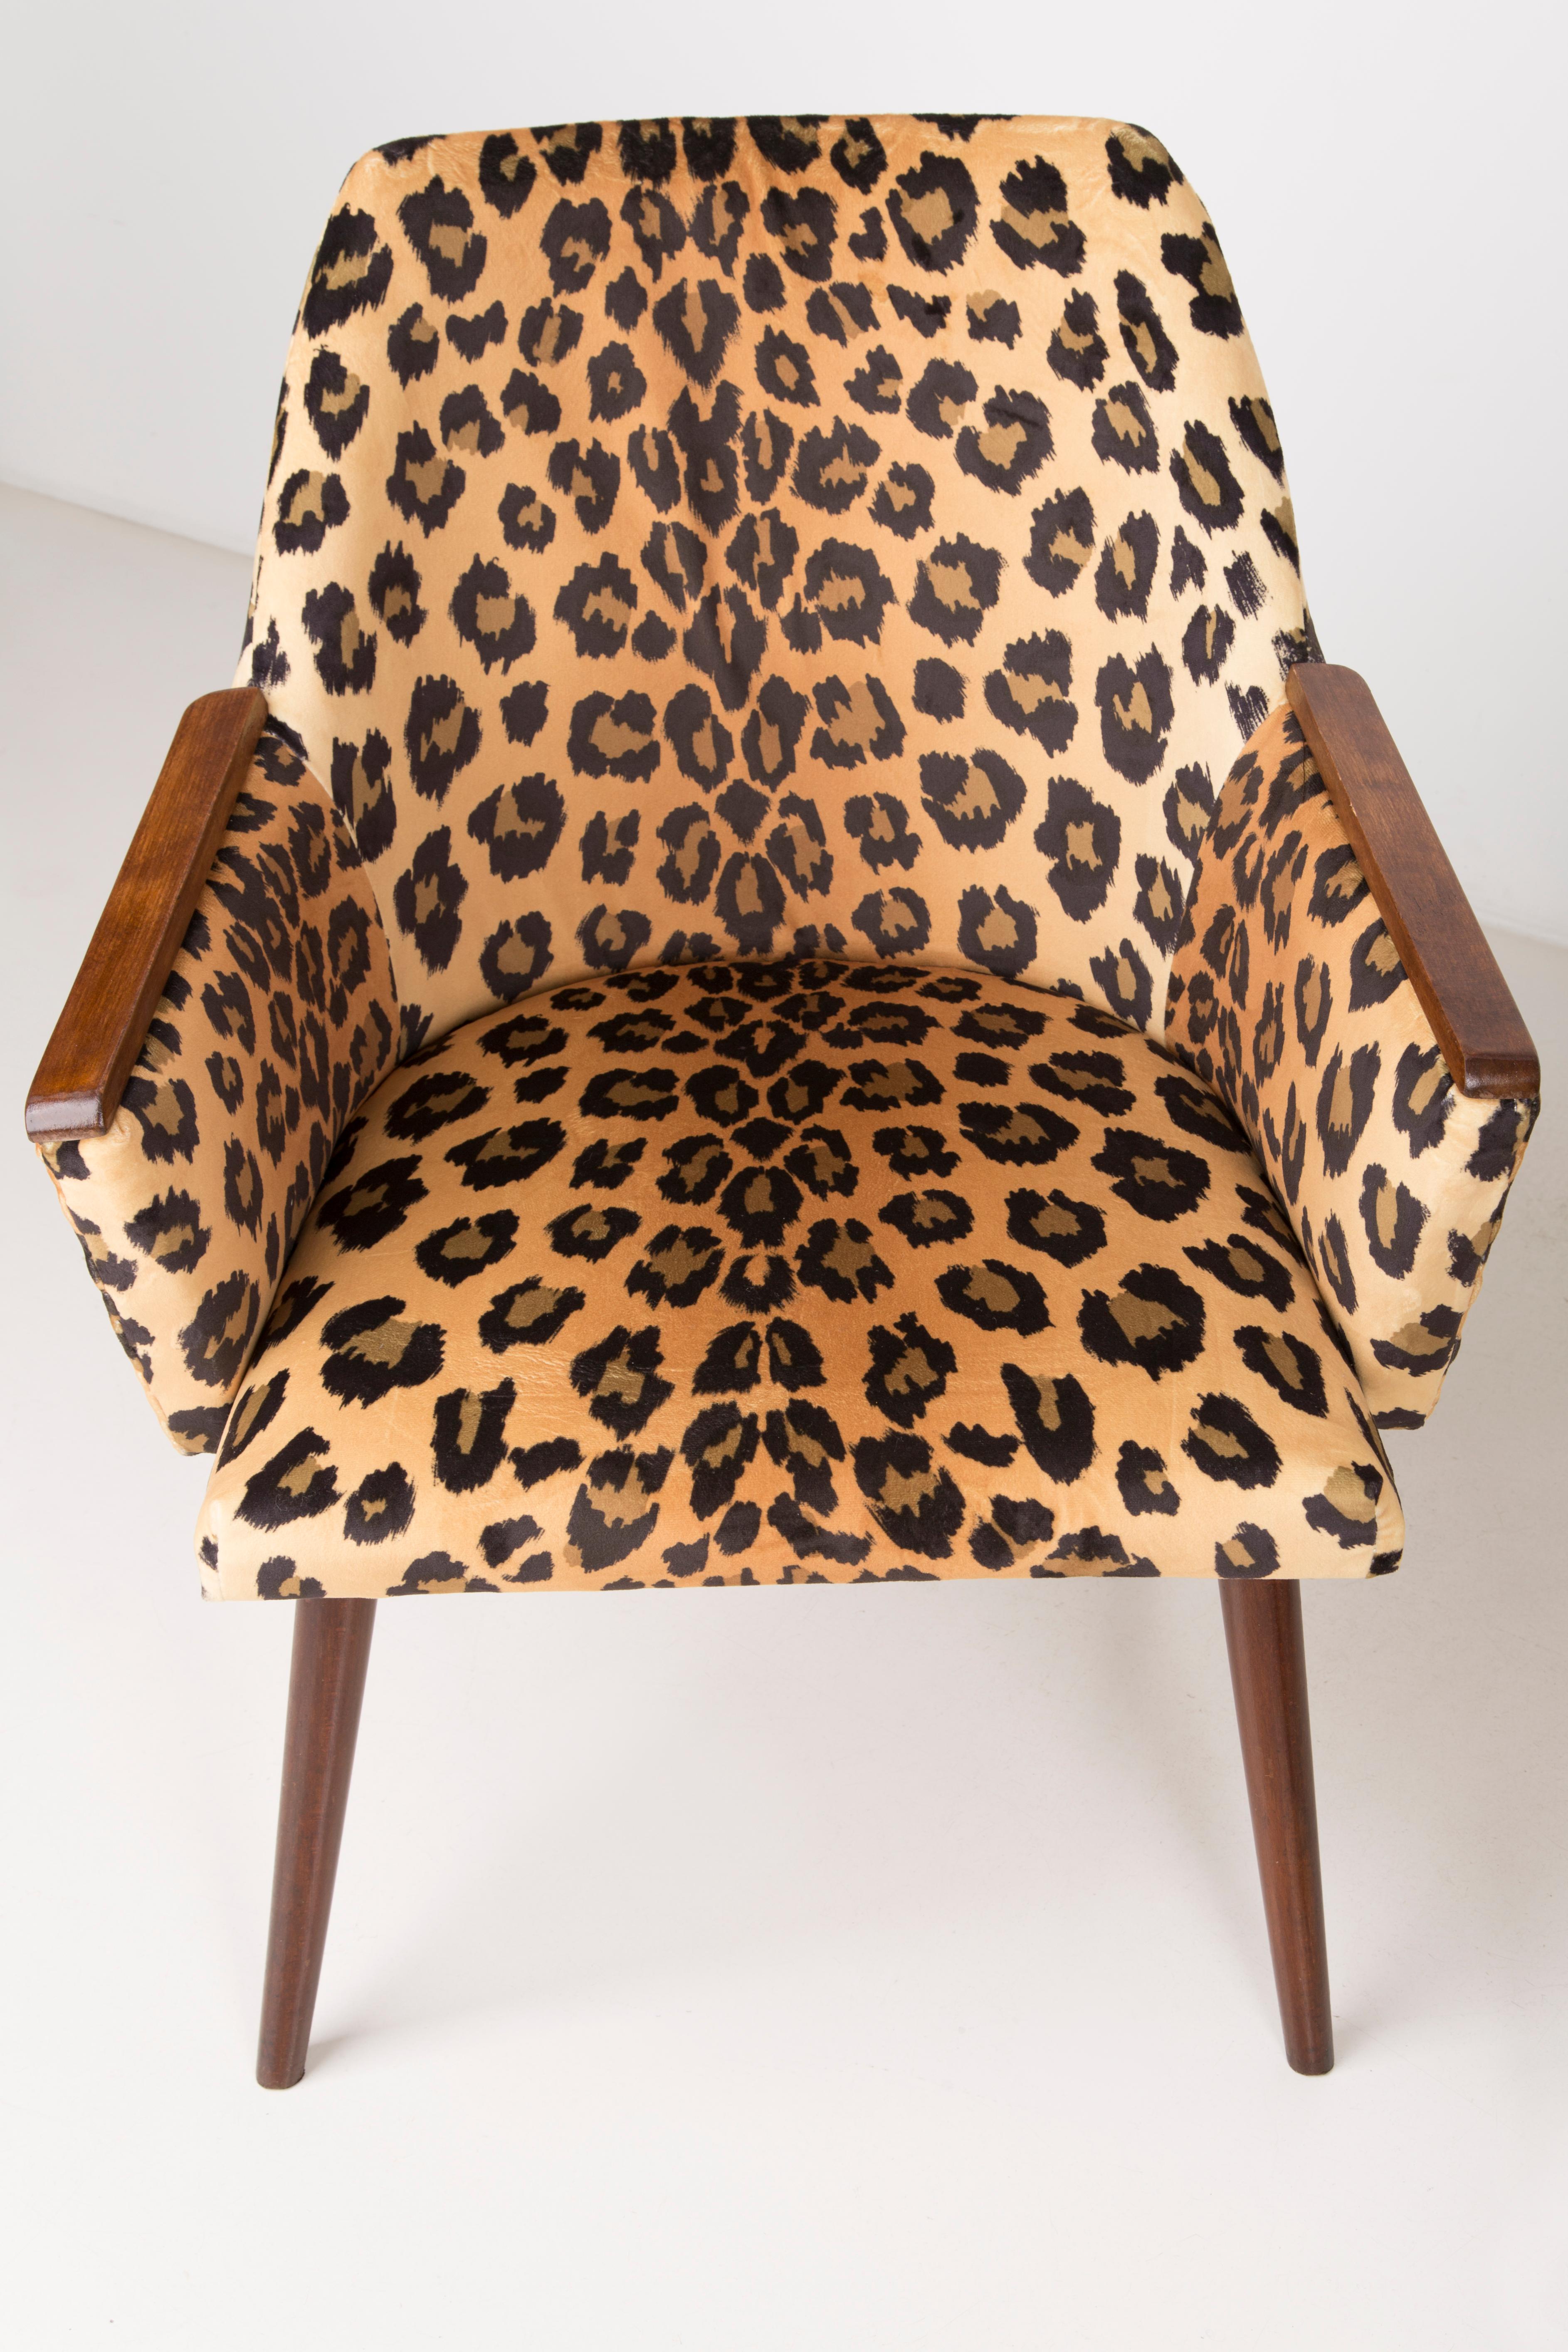 20th Century Set of Two Mid-Century Modern Leopard Print Chairs, 1960s, Germany